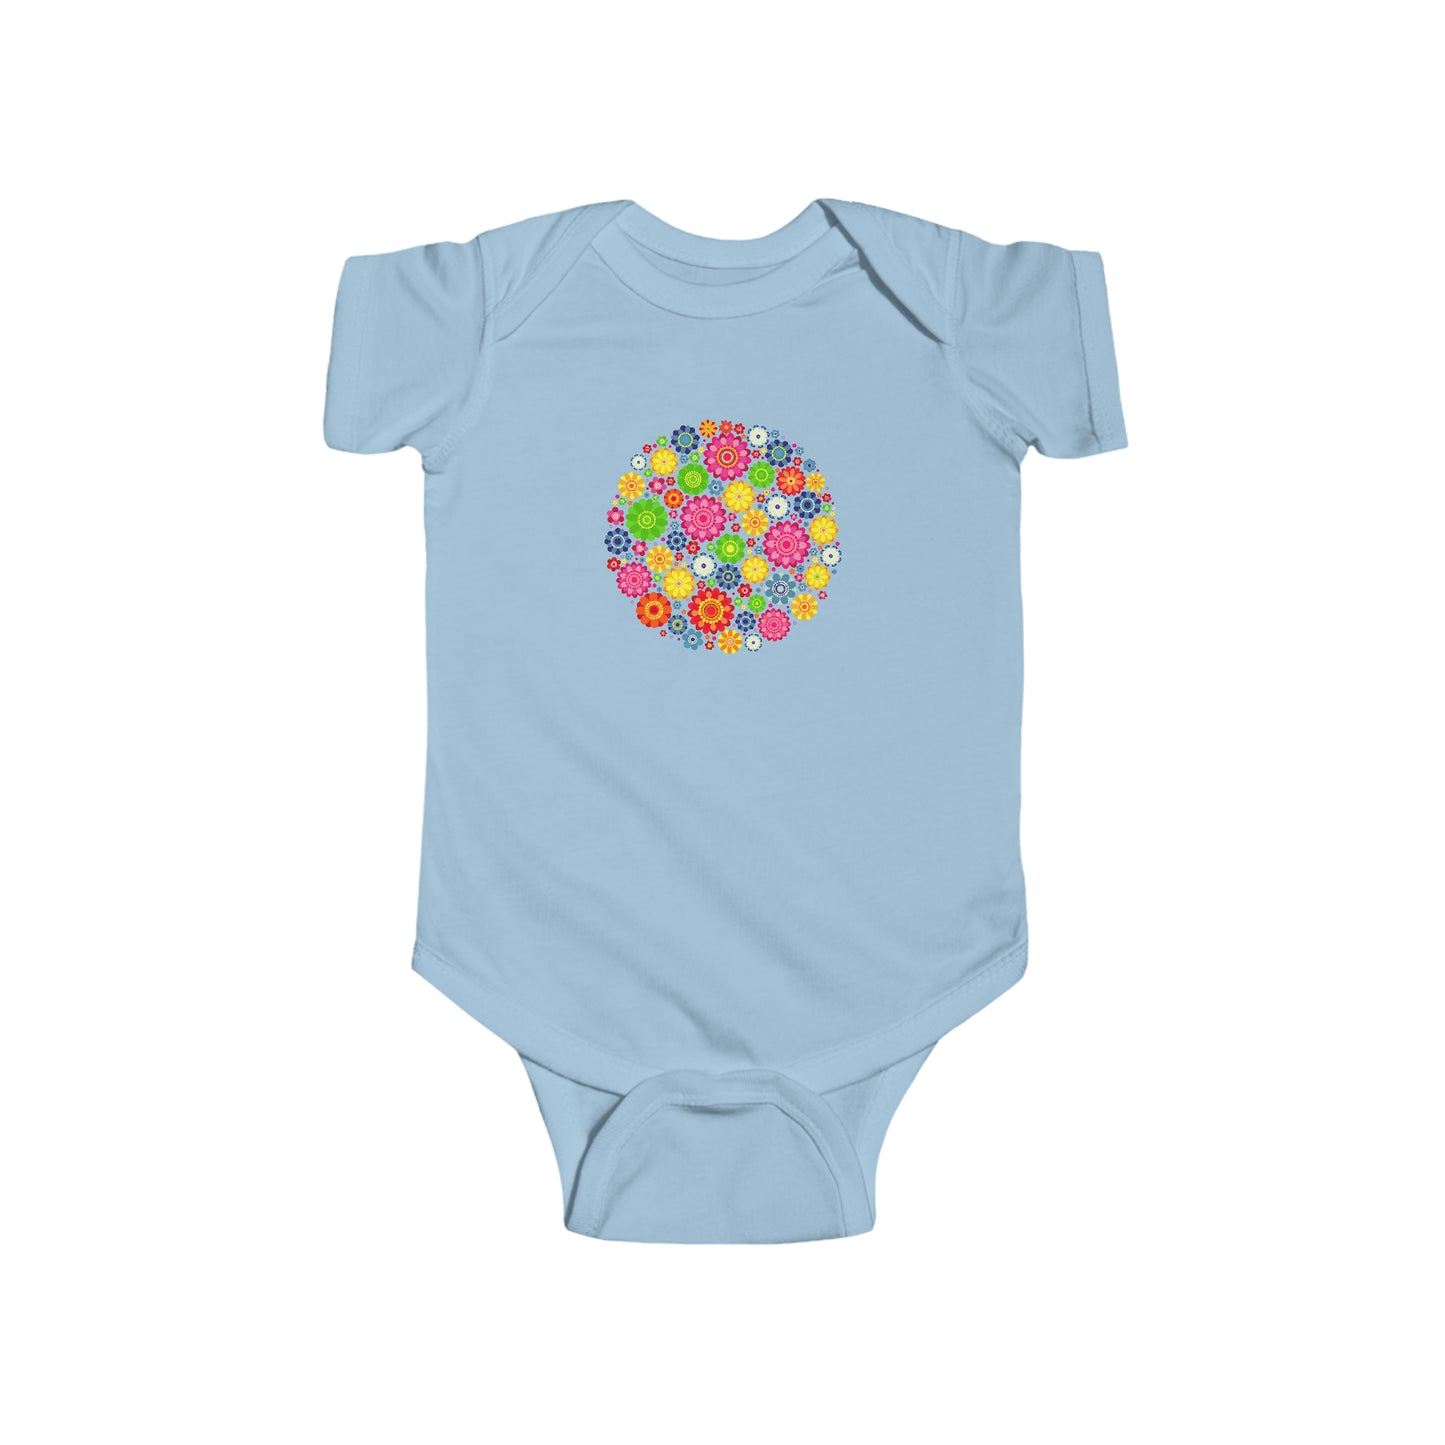 Colorful, Nature, Garden, Flowers- Baby, Infant, Toddler, Soft Cotton, Onesie